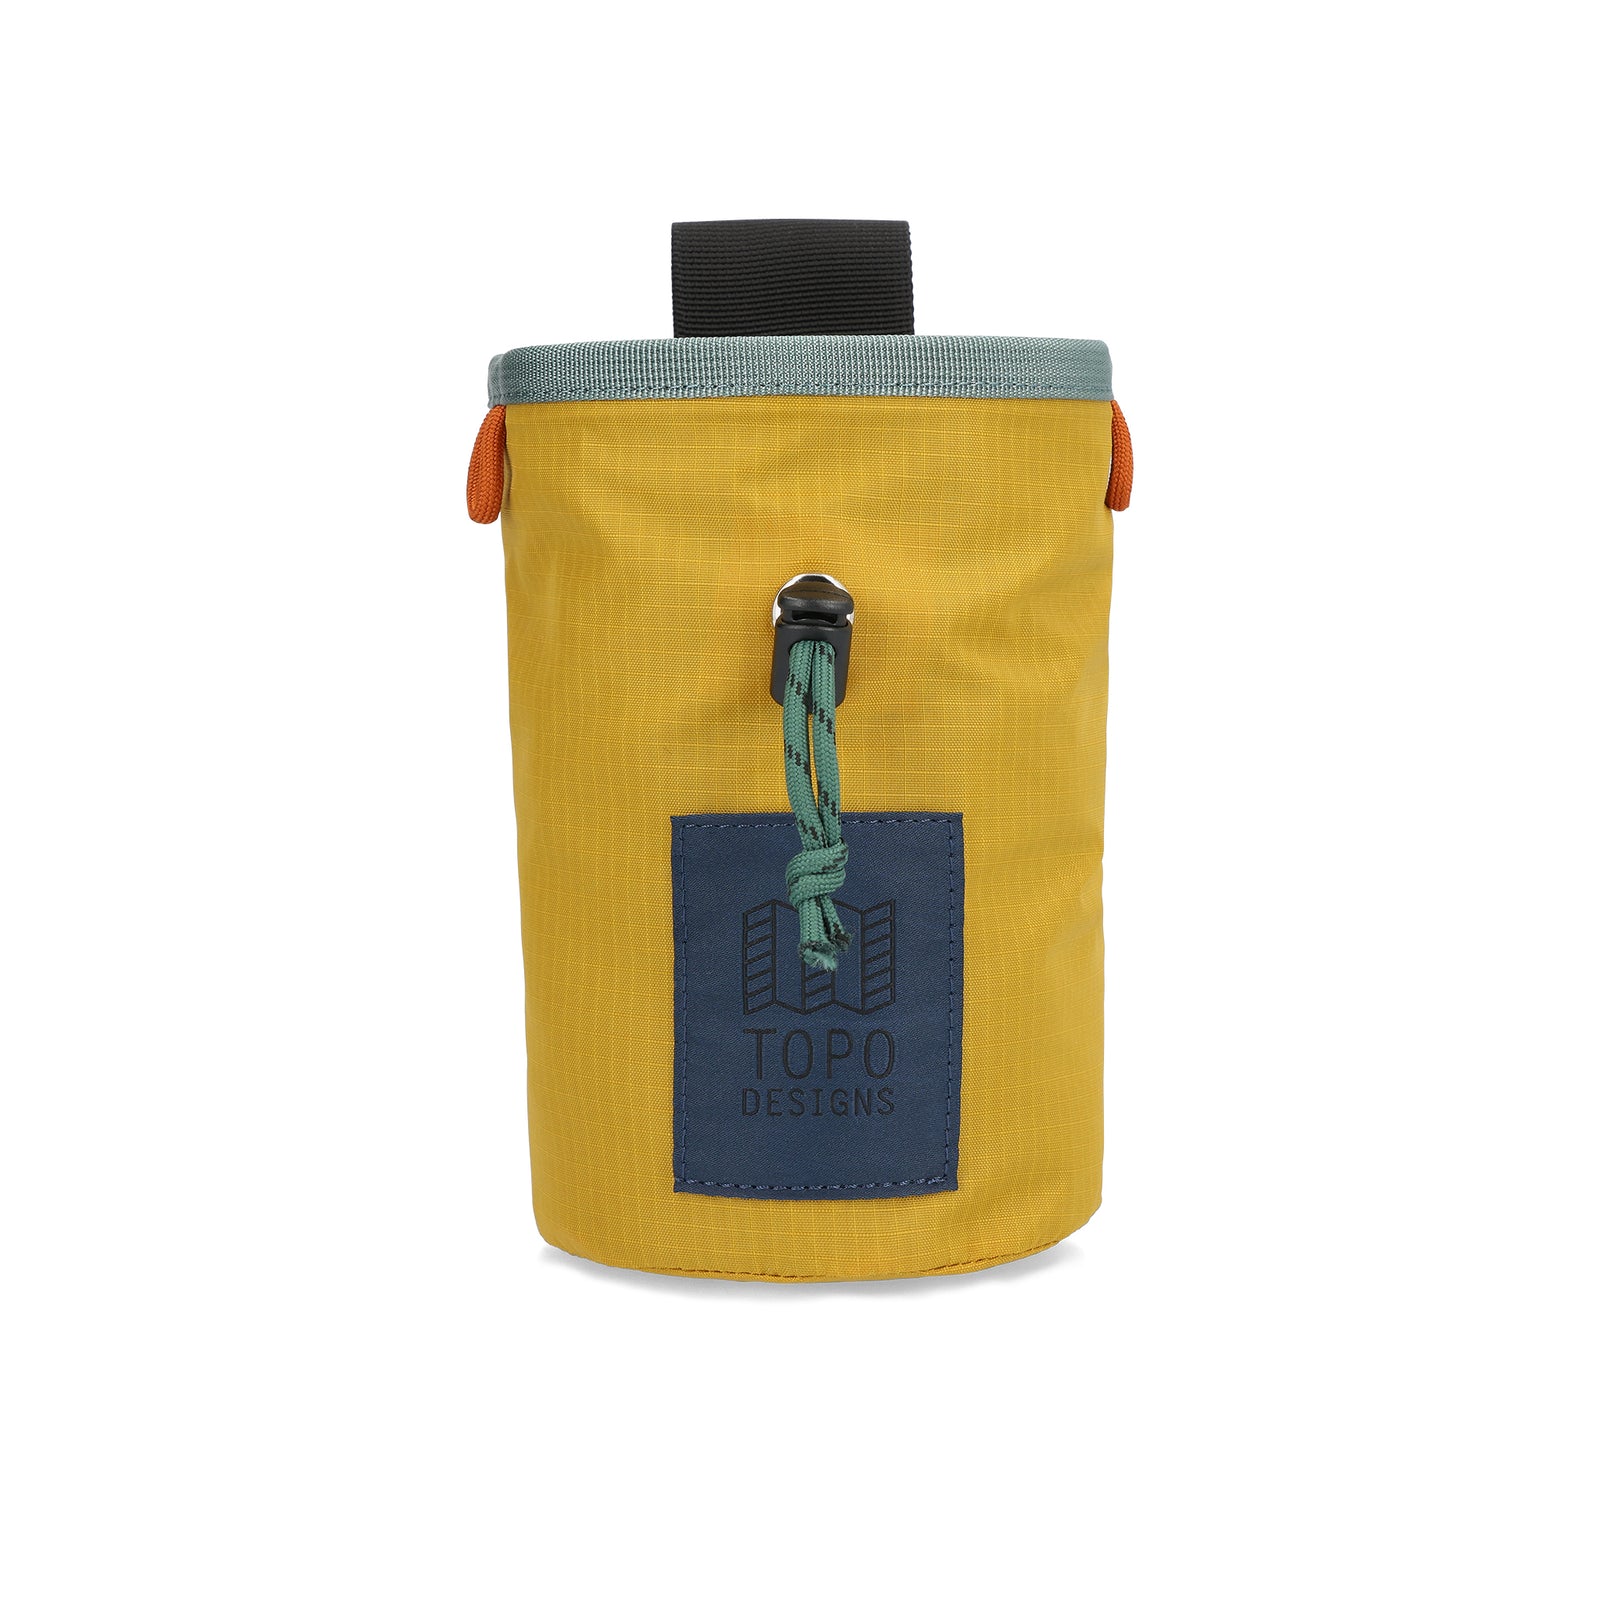 Front View of Topo Designs Mountain Chalk Bag in "Mustard"